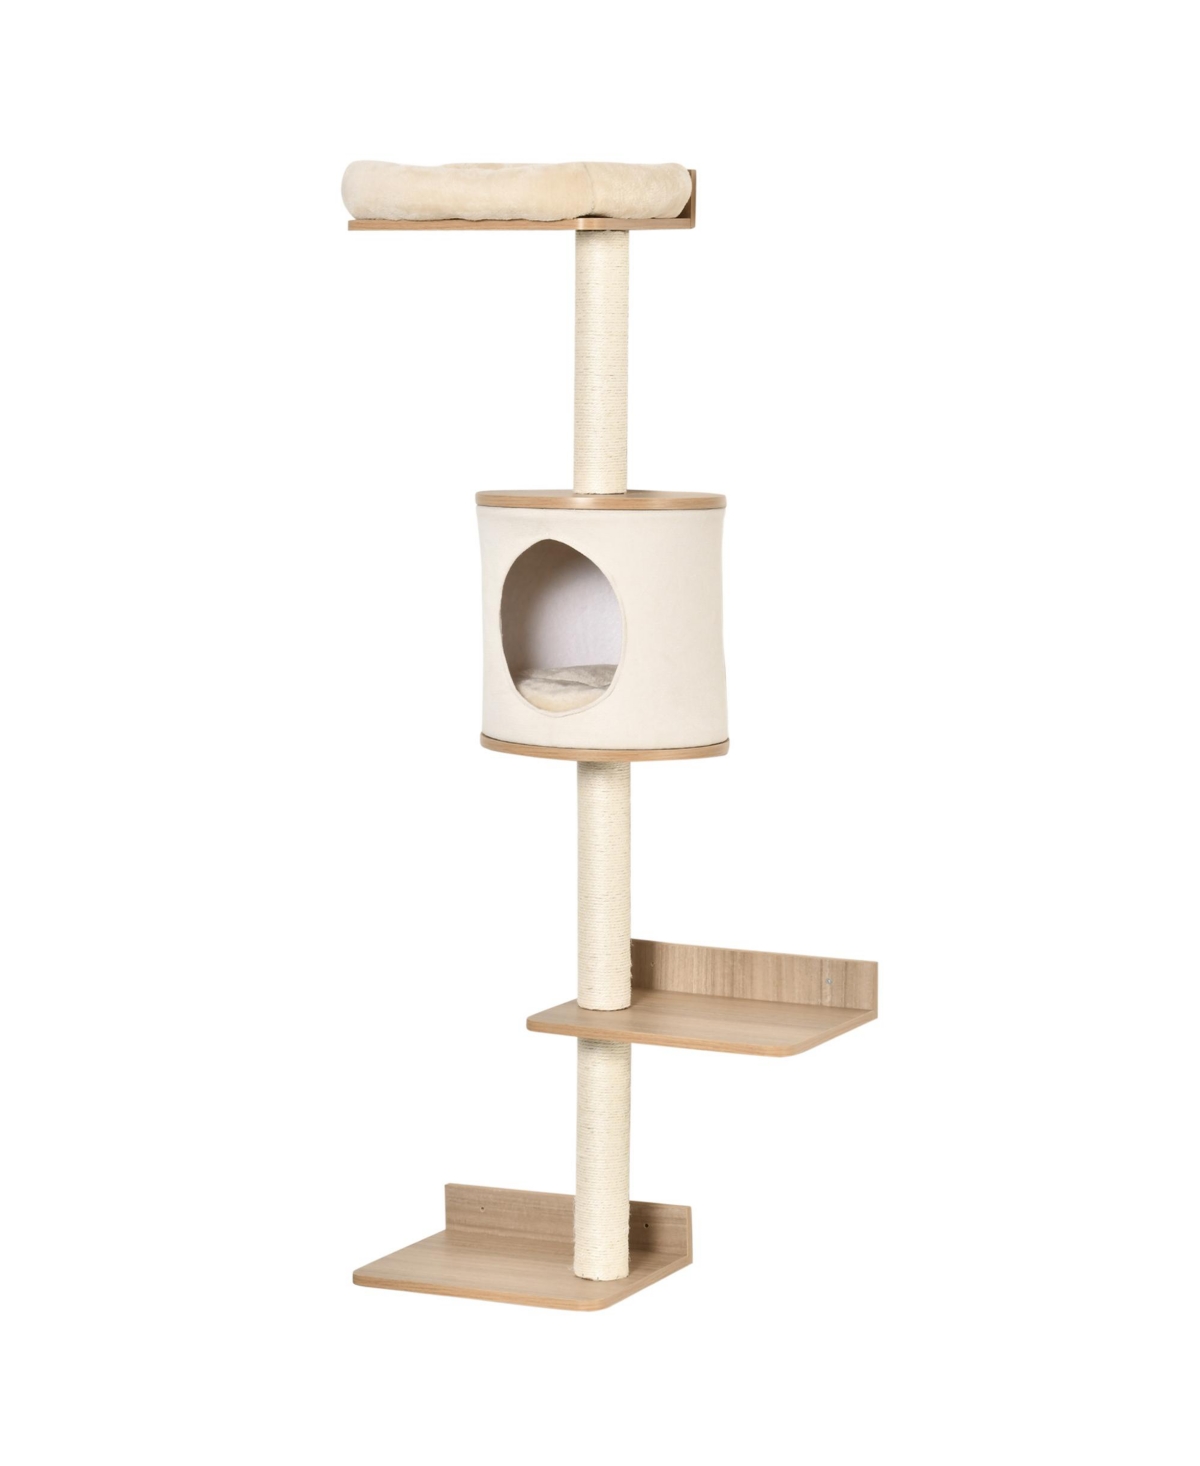 4-Level Wall Mounted Cat Tree Activity Center w/ Bed Scratching Posts - Brown